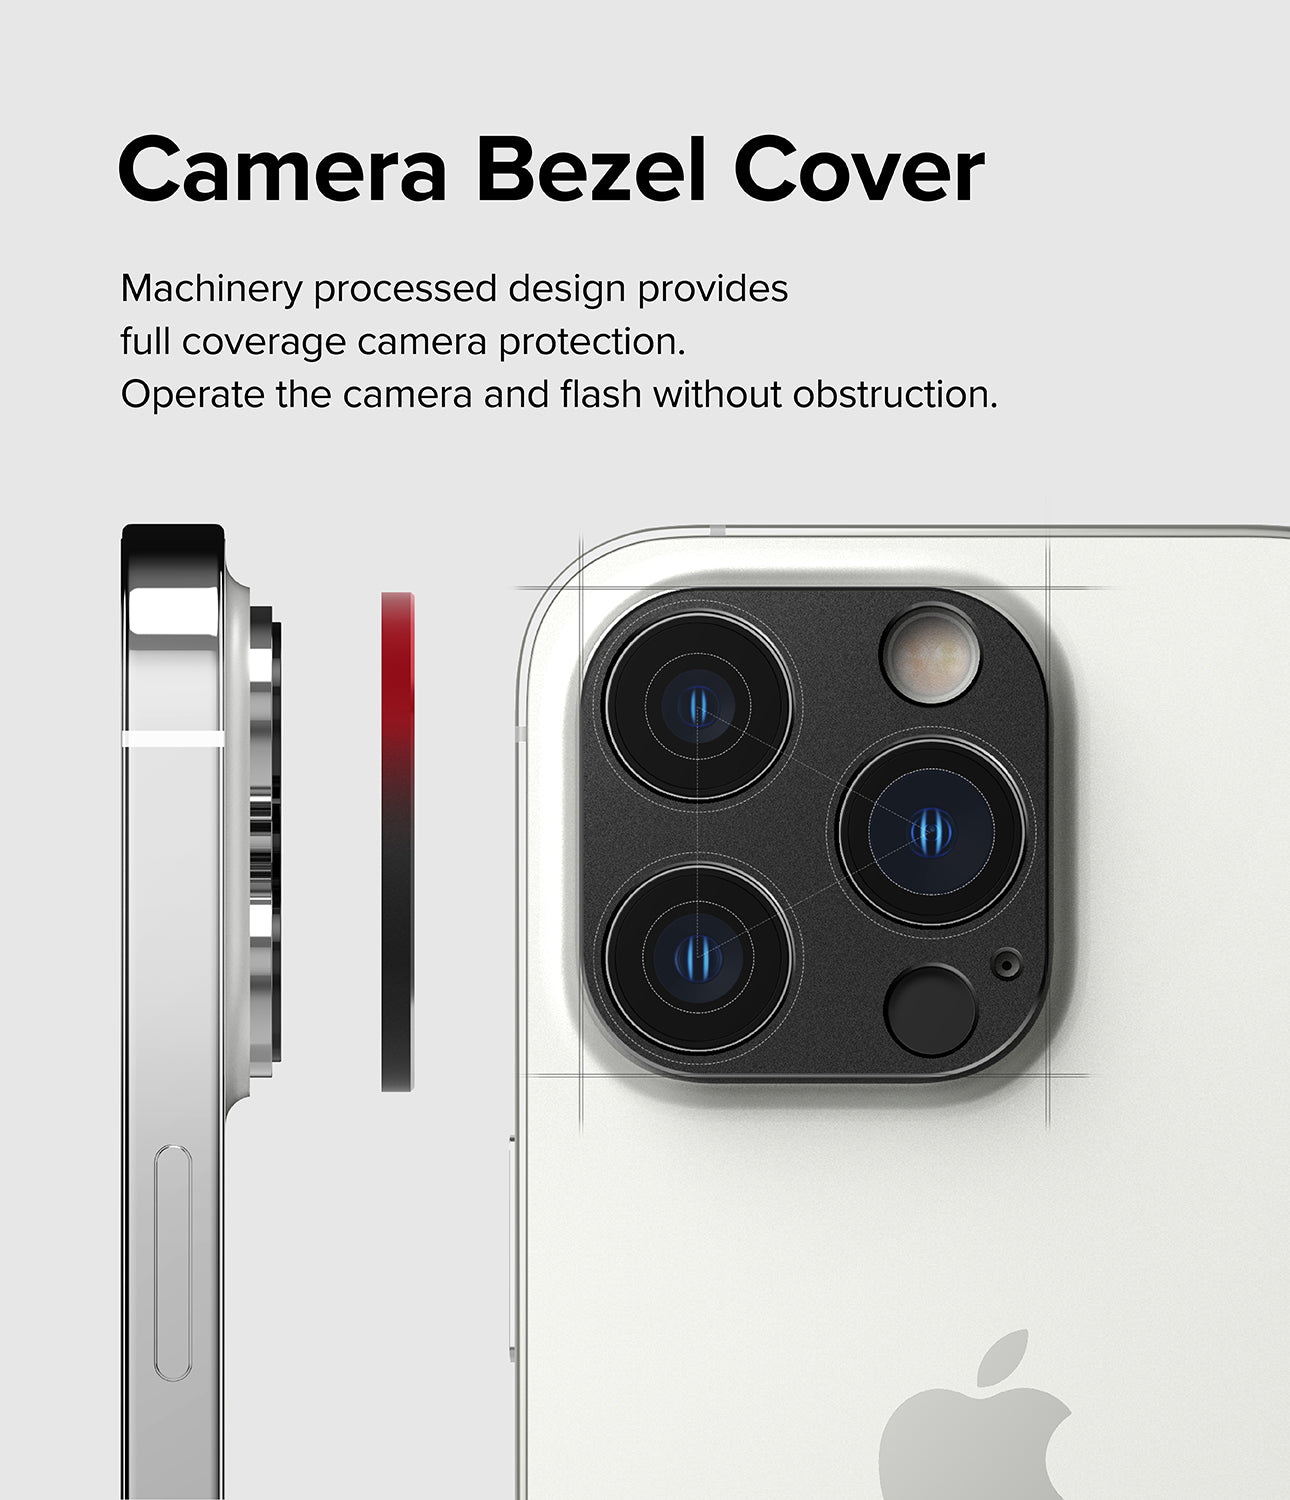 iPhone 14 Pro Max / 14 Pro | Camera Styling - Camera Bezel Cover. Machinery processed design provides full coverage camera protection. Operate the camera and flash without obstruction.